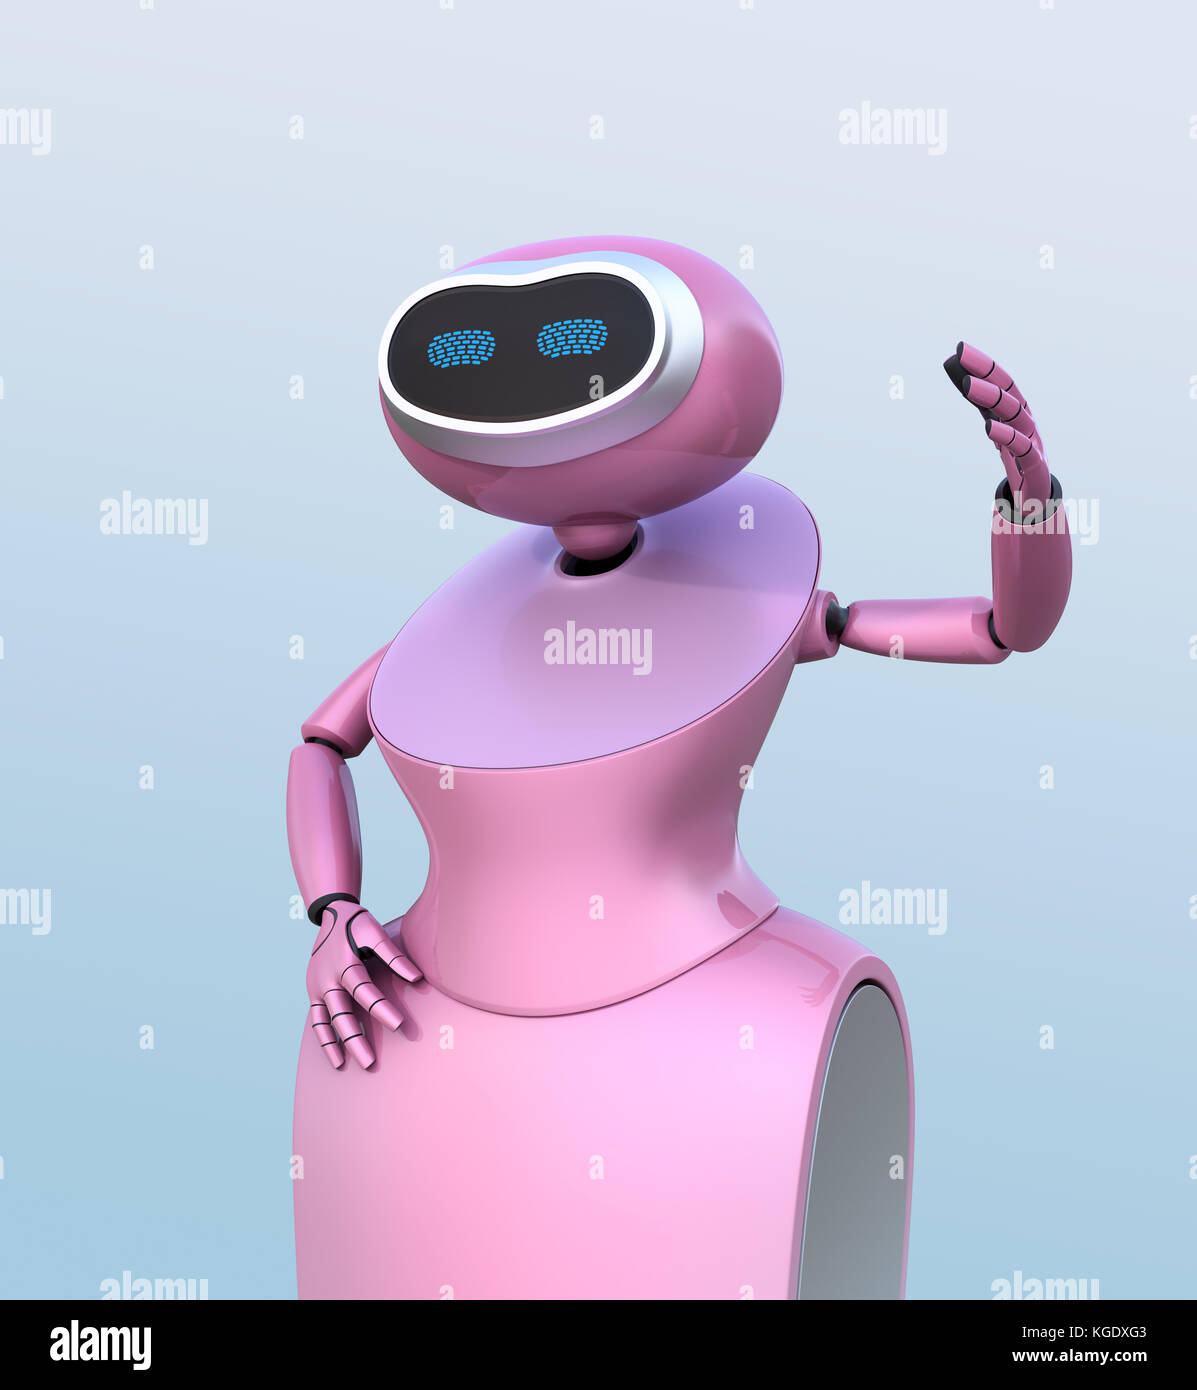 Pink humanoid robot isolated on light blue background. 3D rendering image. Stock Photo